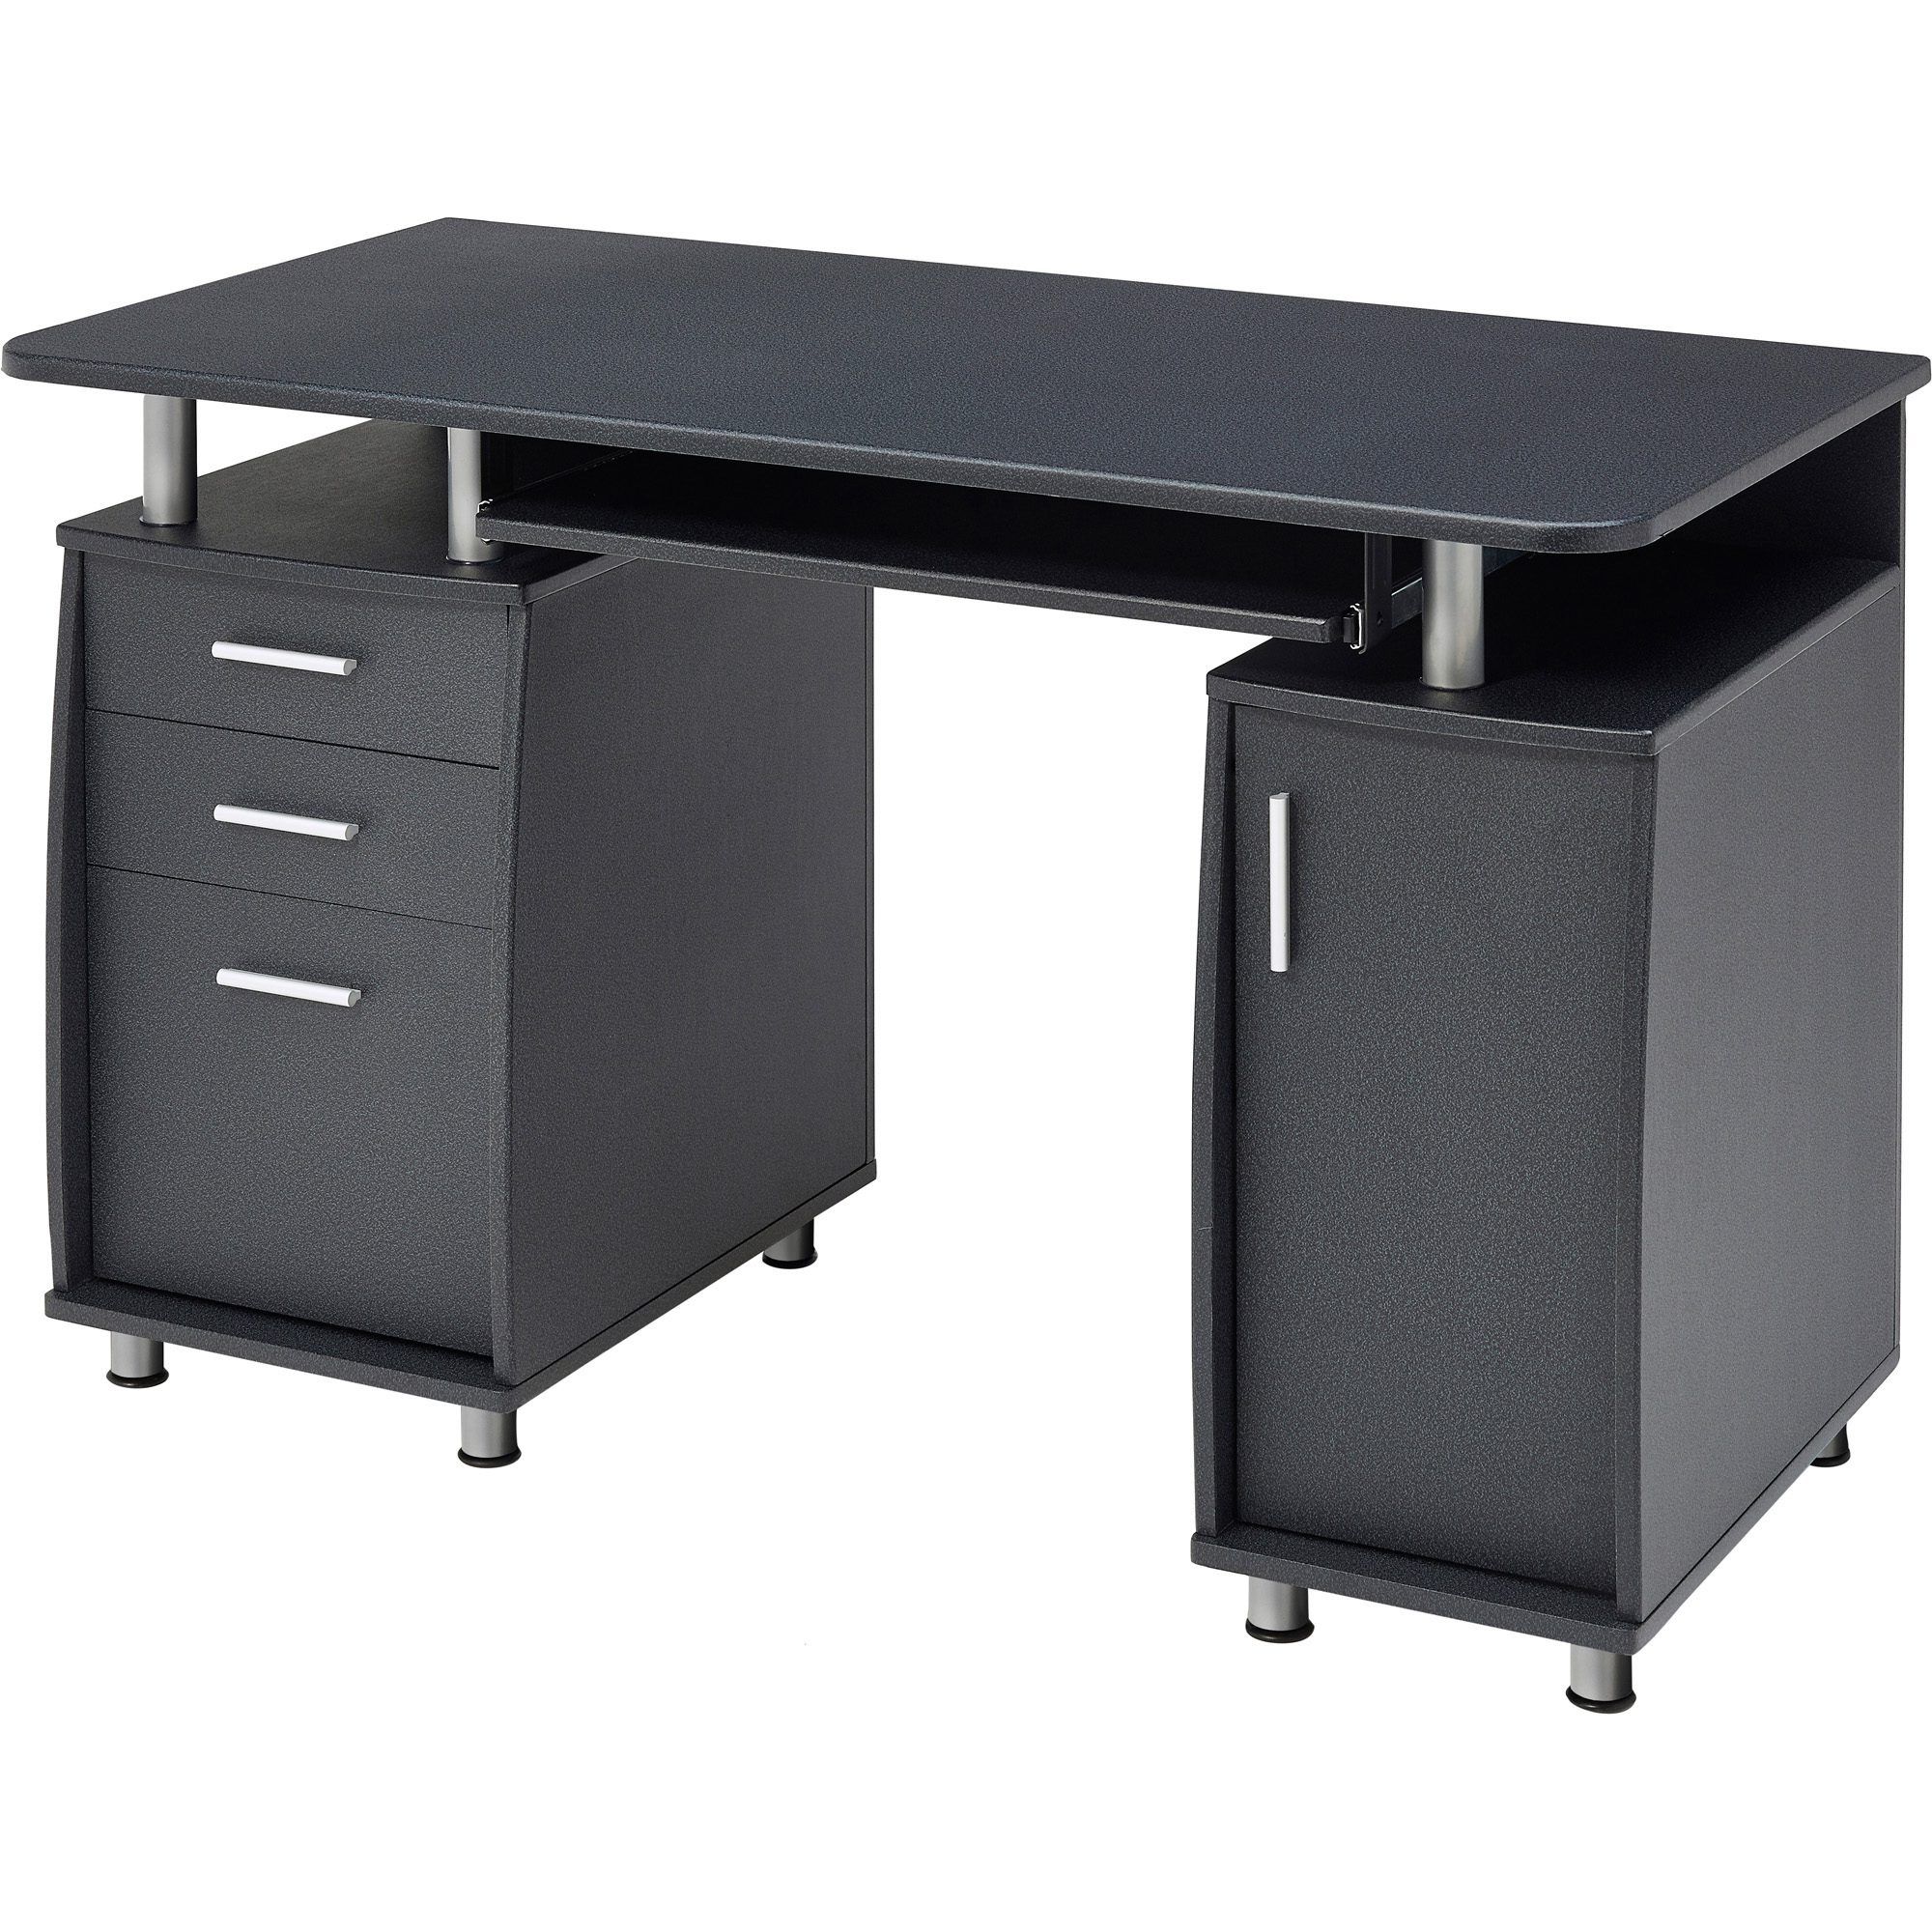 Favorite Emperor Desk With Cupboard & Drawers Graphite Black With Regard To Graphite Convertible Desks With Keyboard Shelf (View 10 of 15)